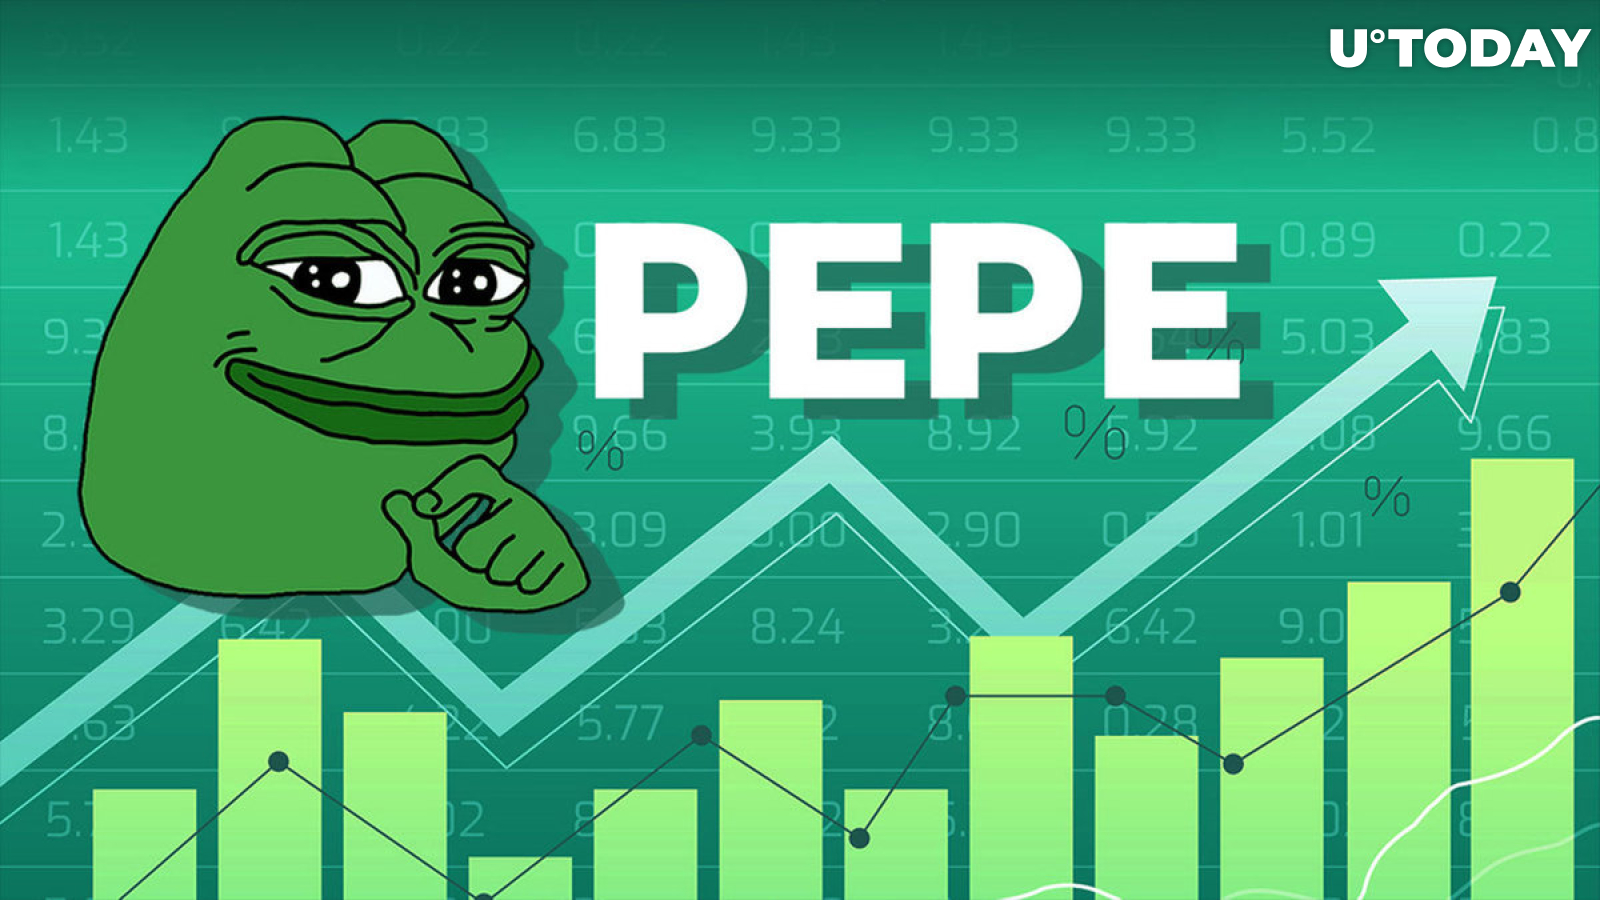 Pepe (PEPE) Suddenly Jumps 7% as Whale Snaps up Trillions of Tokens